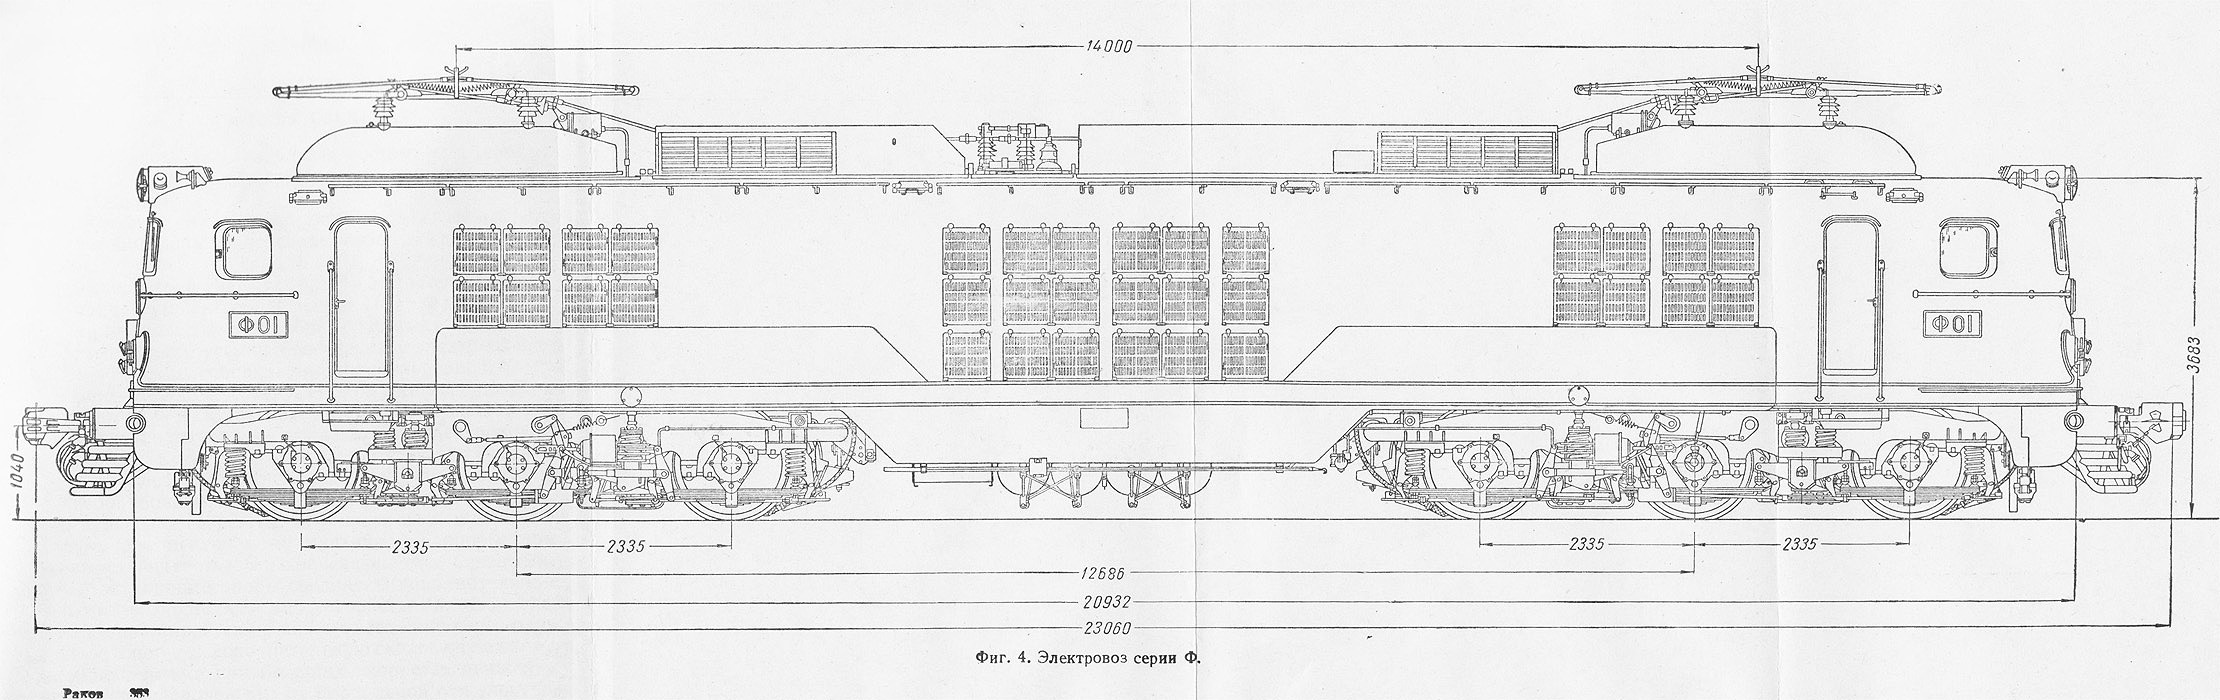 Scheme of the series F electric locomotives